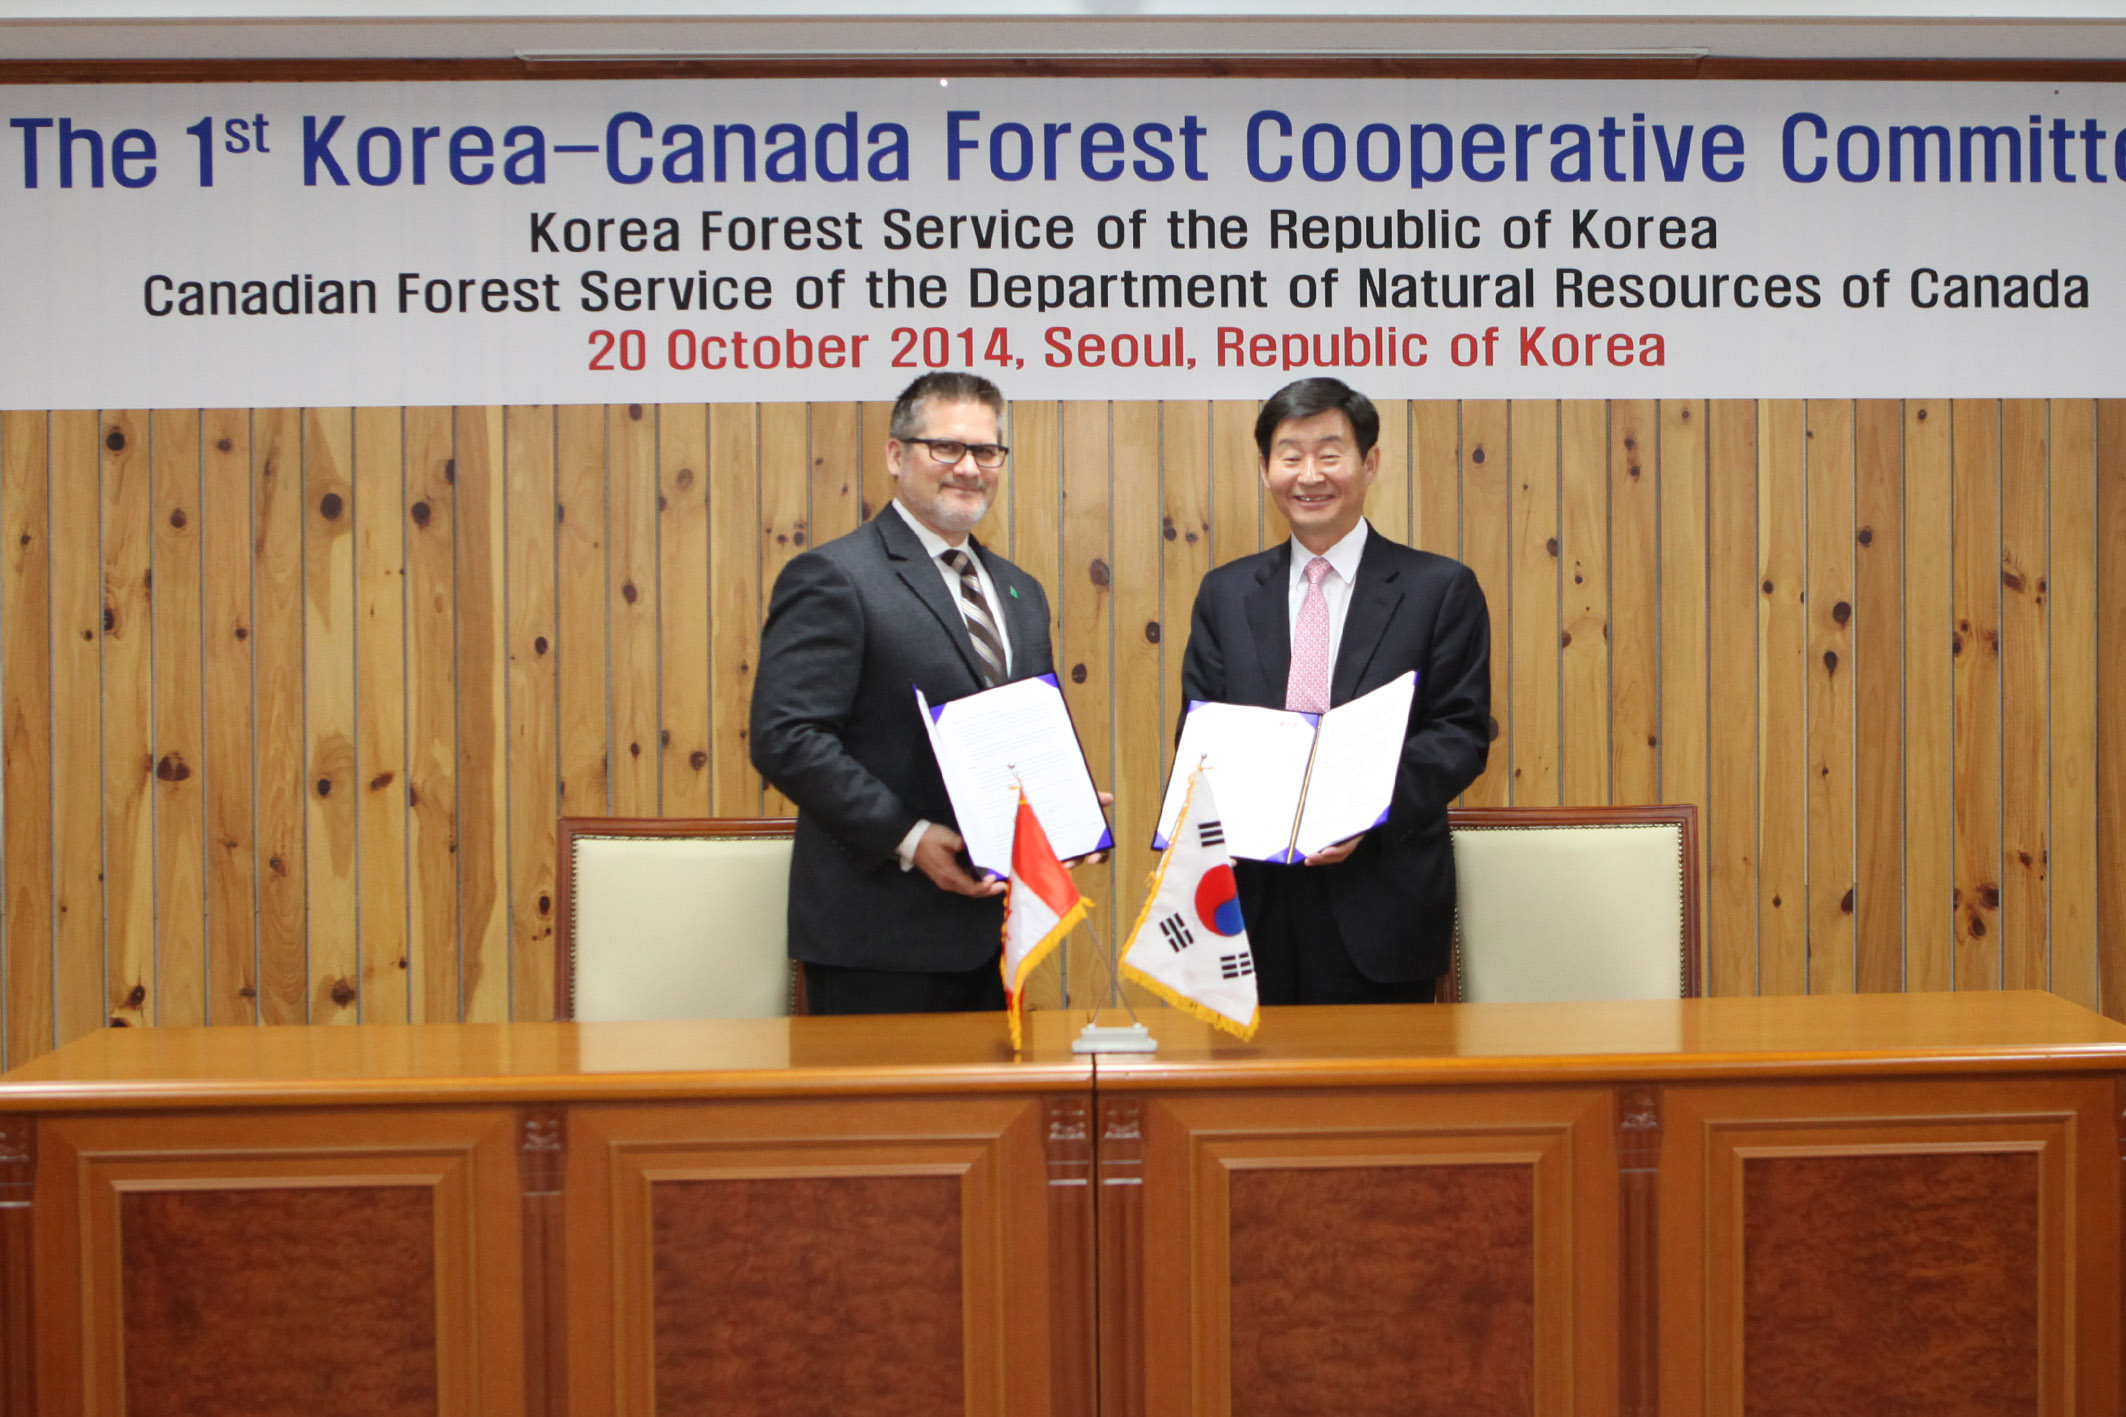 1st  Korea-Canada Forest Cooperative Committee 이미지2